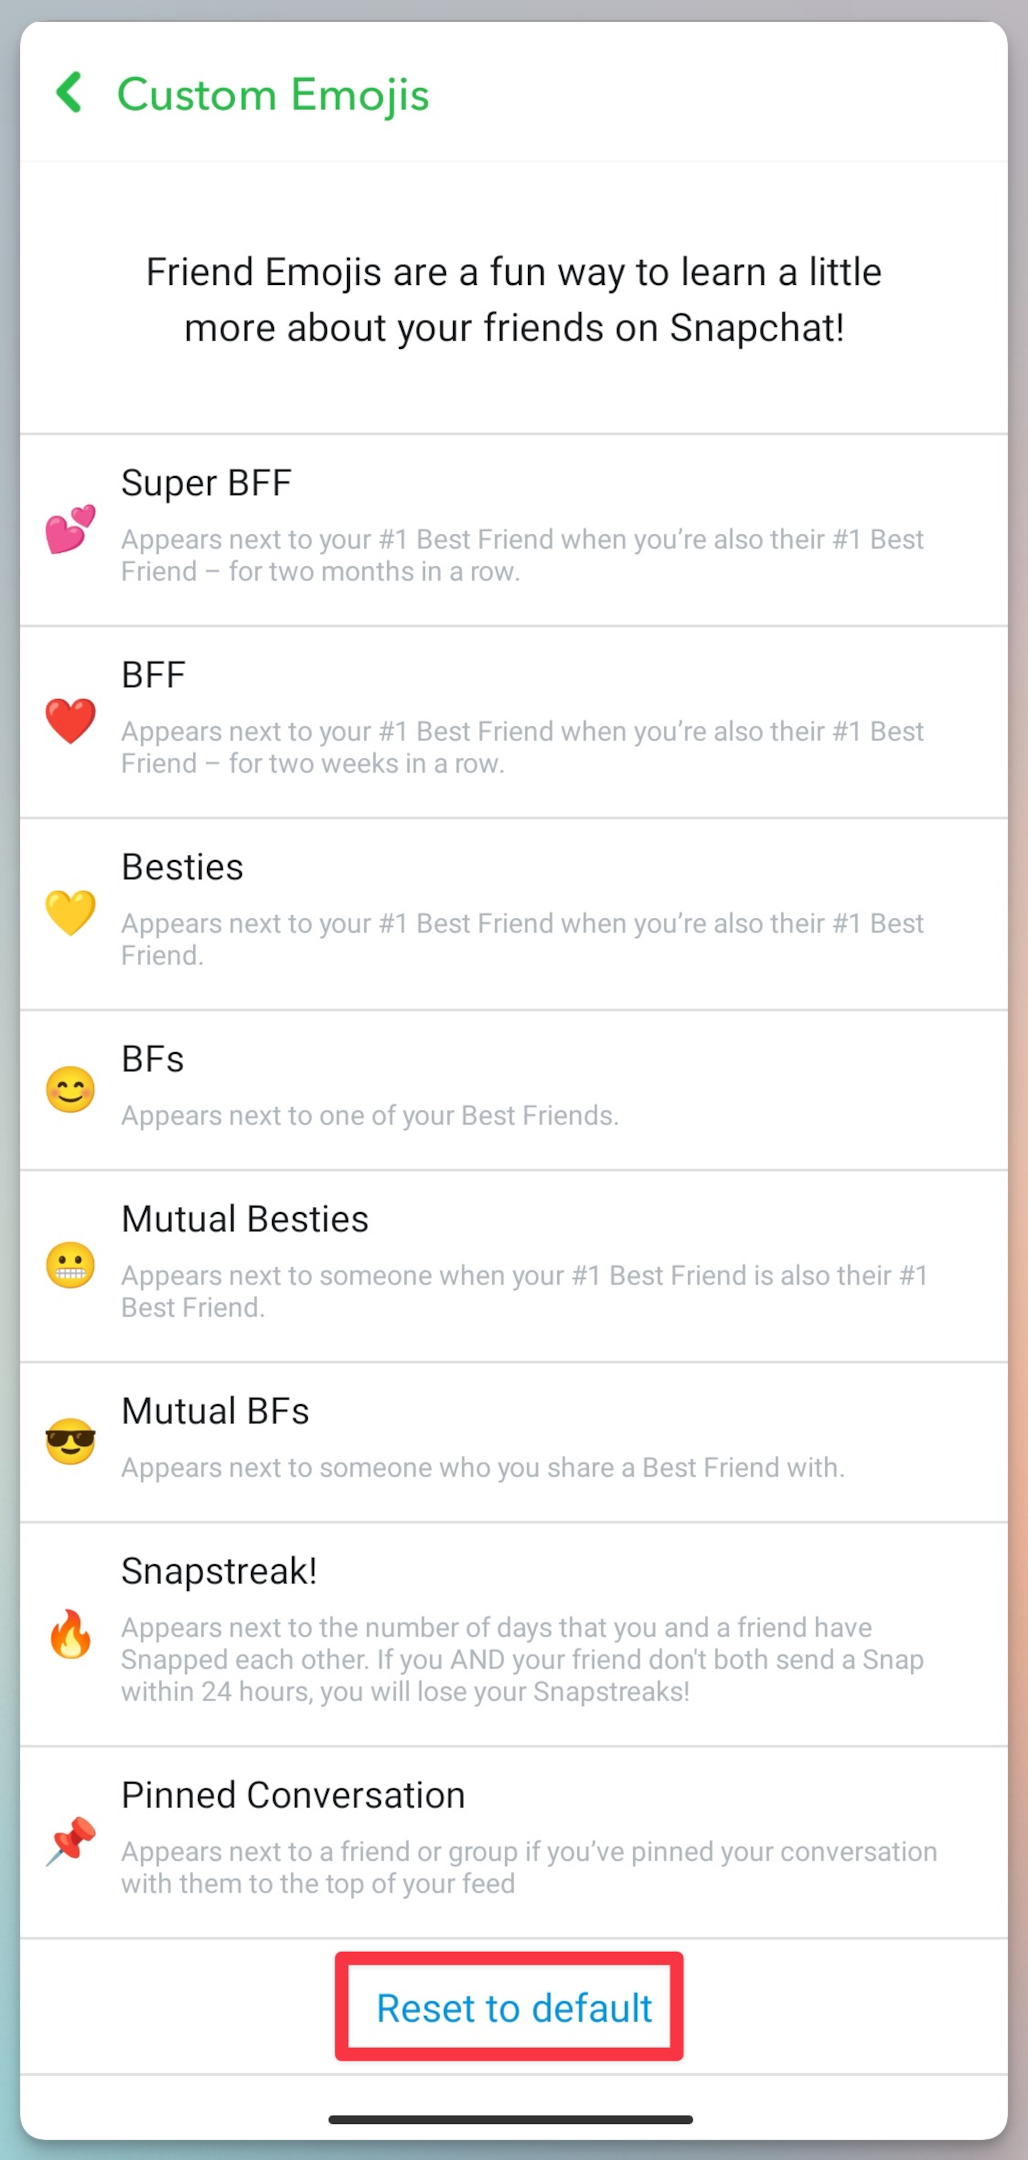 Remote.tools shows how to customize friends emojis on Snapchat